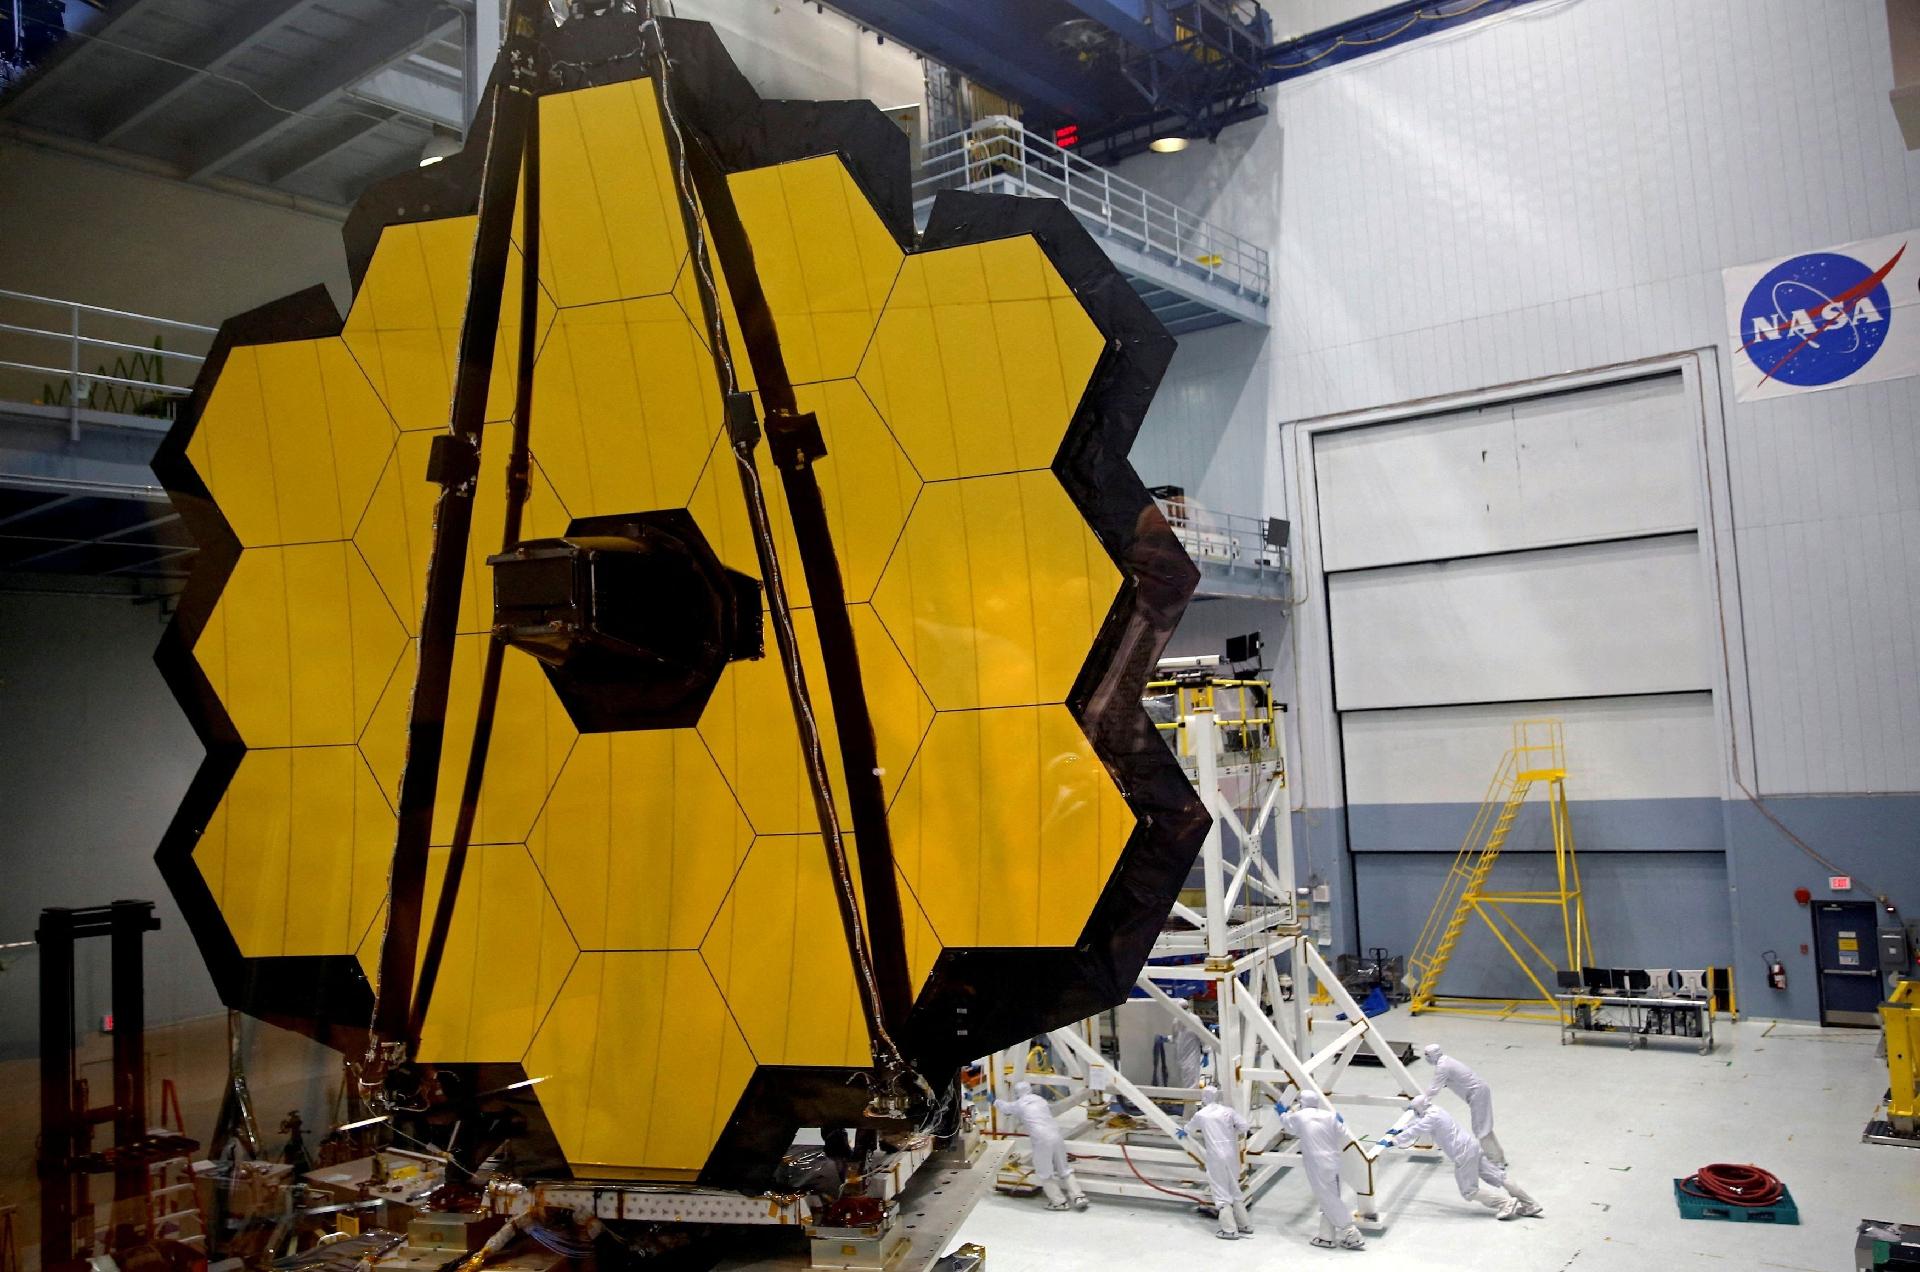 Image taken on November 2 shows the open James Webb telescope with its 6.5-meter mirror - Kevin Lamarque/Reuters